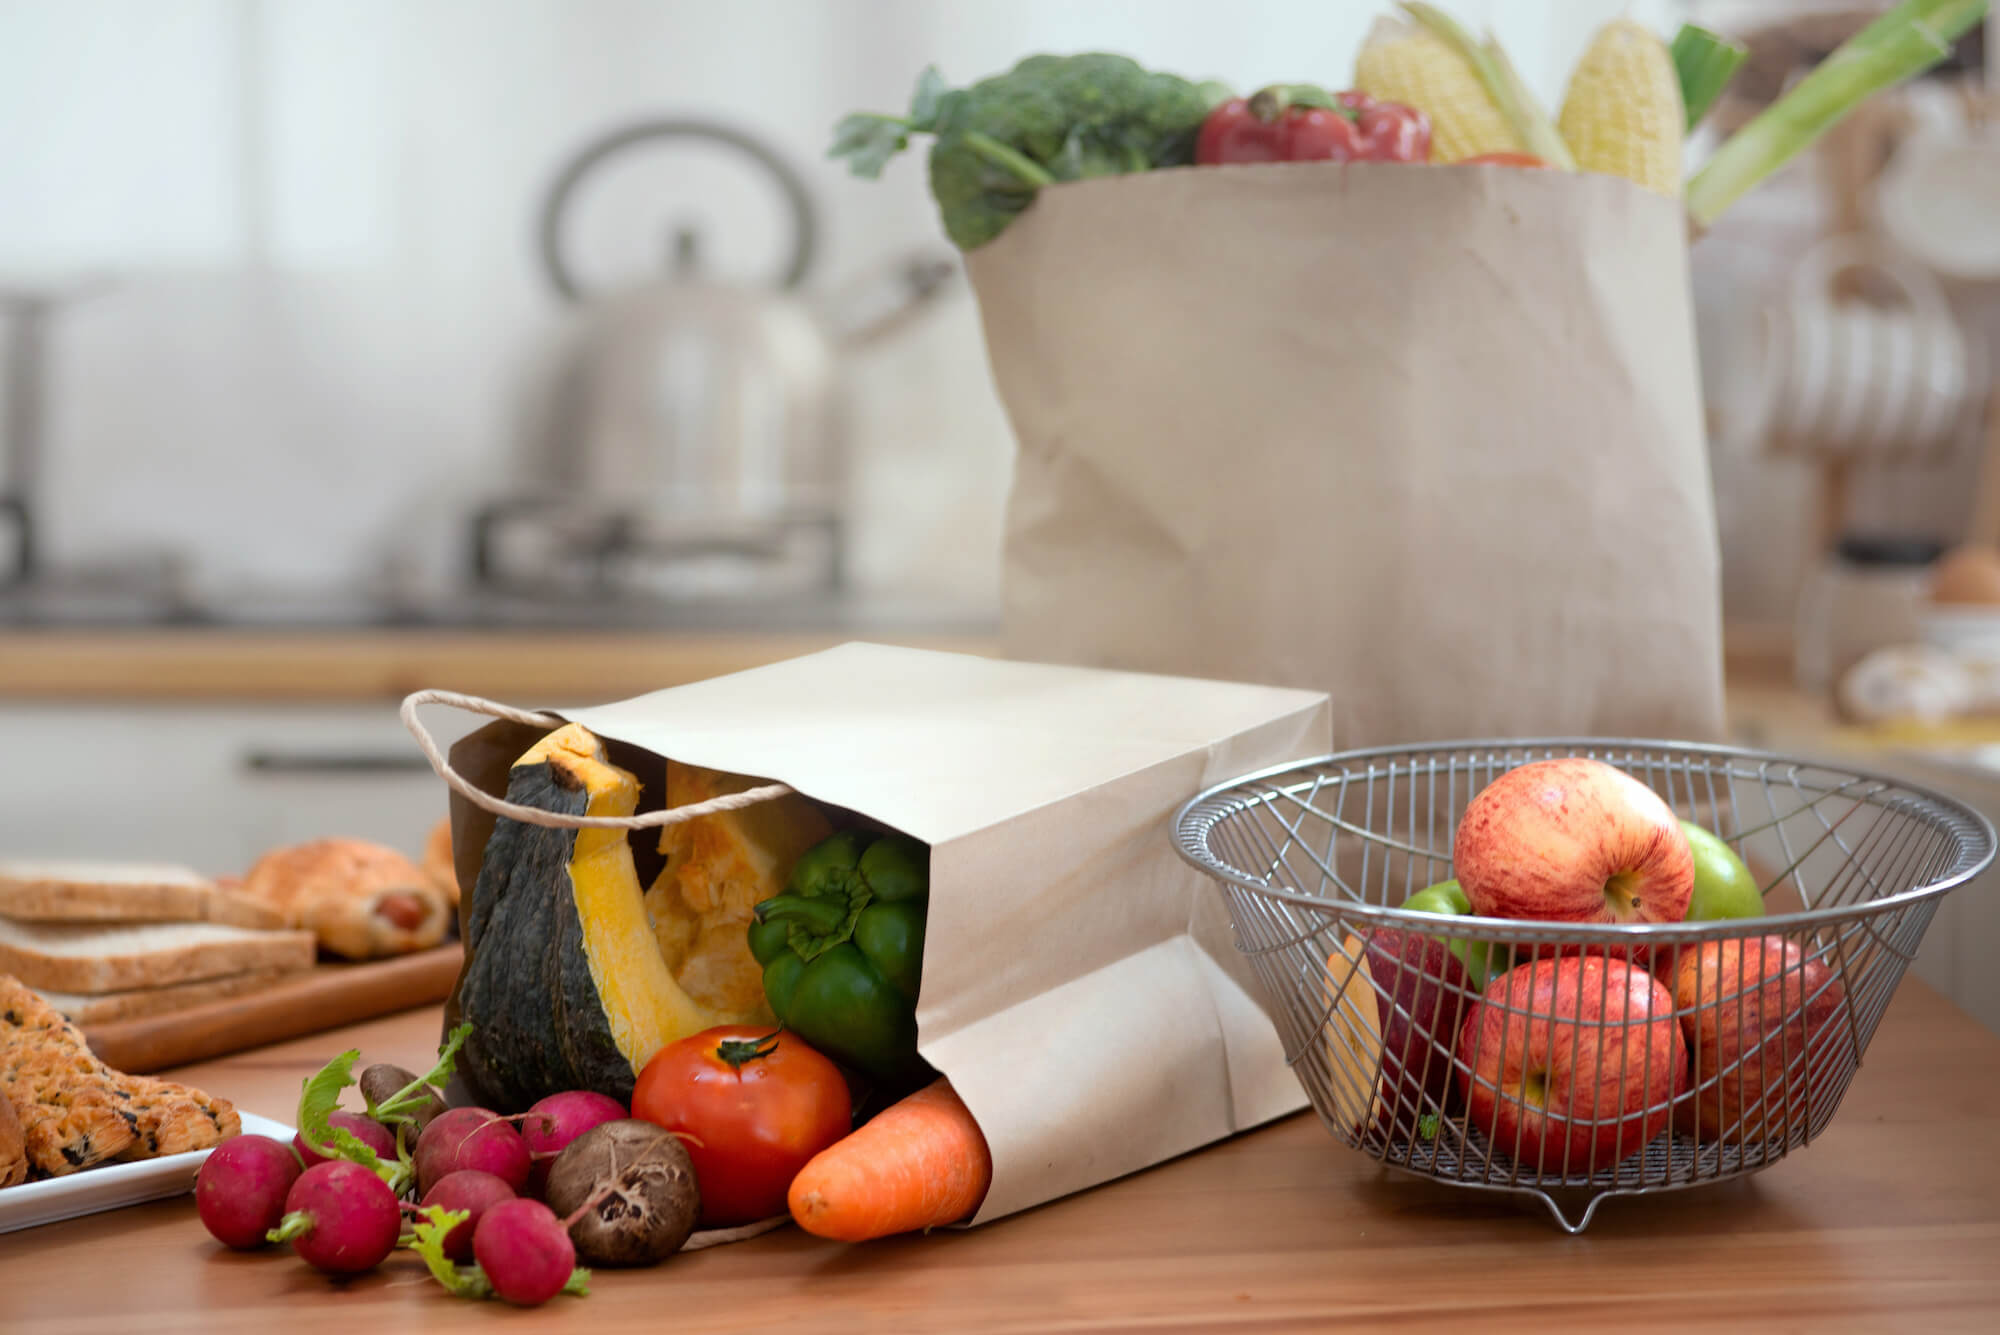 Fruit and veg in paper bags